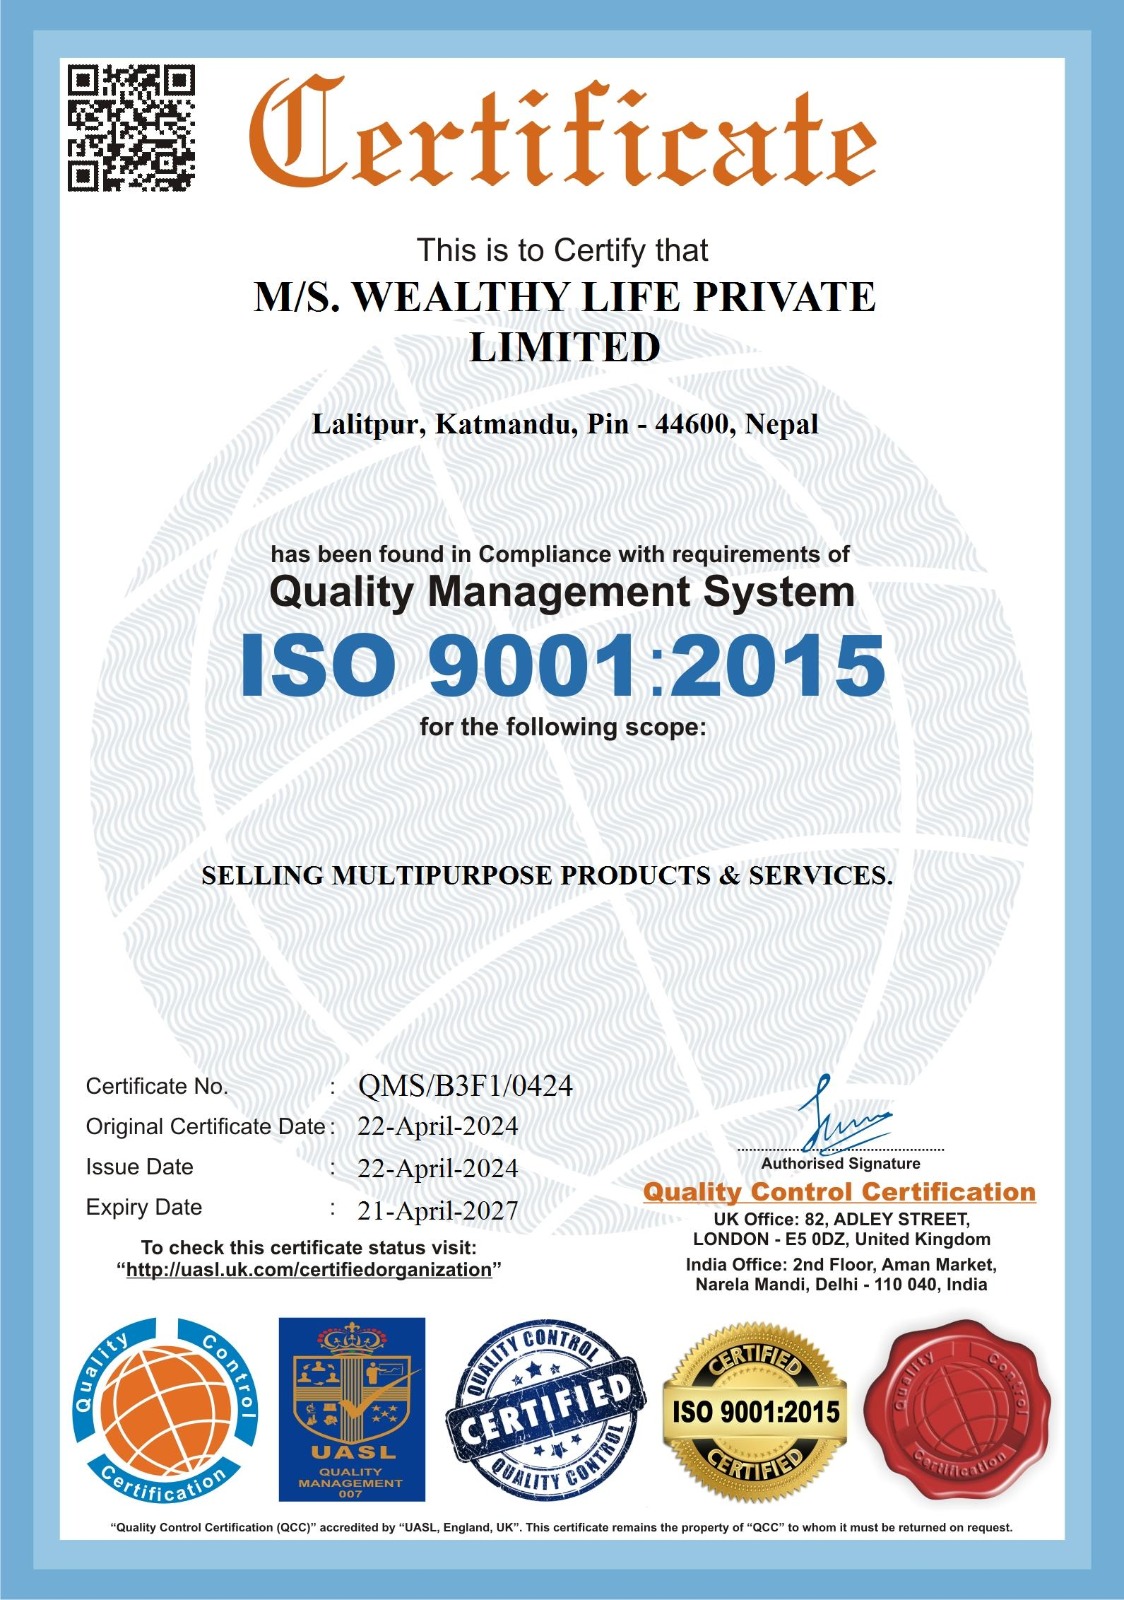 M/S. Wealthy Life PVT LTD ISO 9001-2015 Certification by Certification House. Get Your ISO Certification in Nepal with the help of Certification House Expert Team